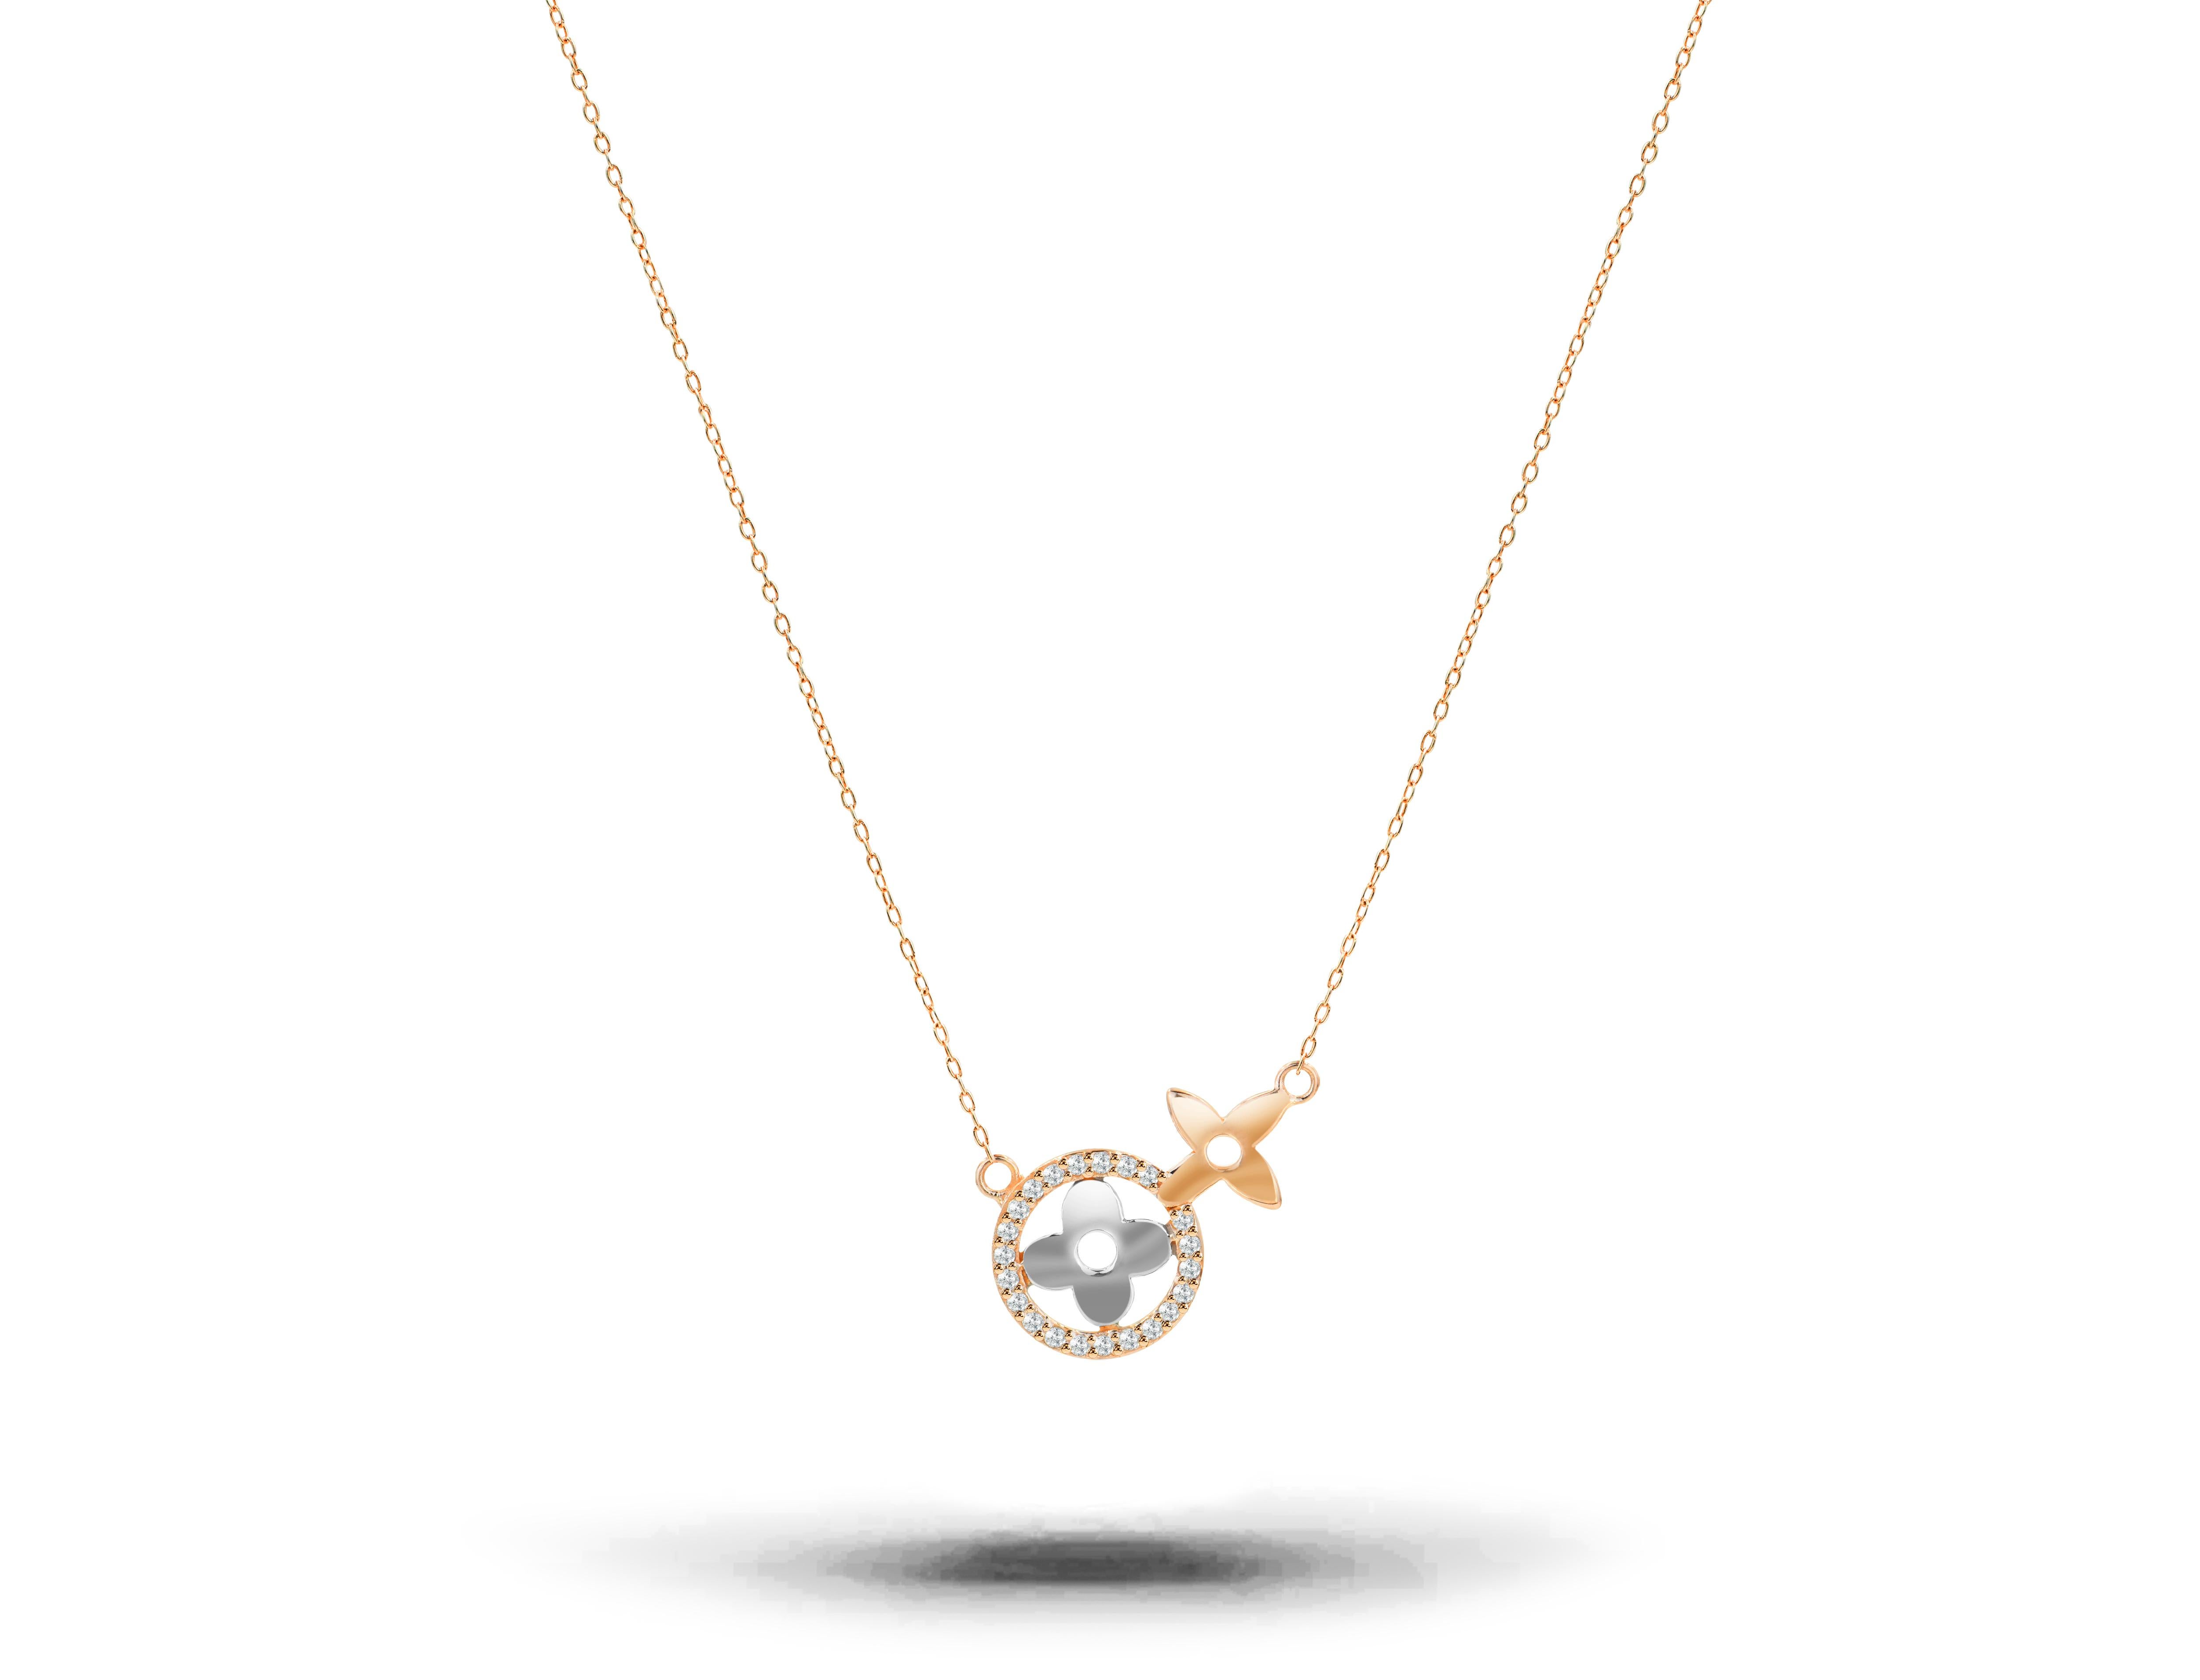 Pave Diamond Clover Necklace is made of 18k solid gold.
Available in three colors of gold:  Rose Gold / Yellow Gold / White Gold.

Delicate dainty lucky clover necklace with natural diamond. This modern minimalist necklace is a perfect gift for your